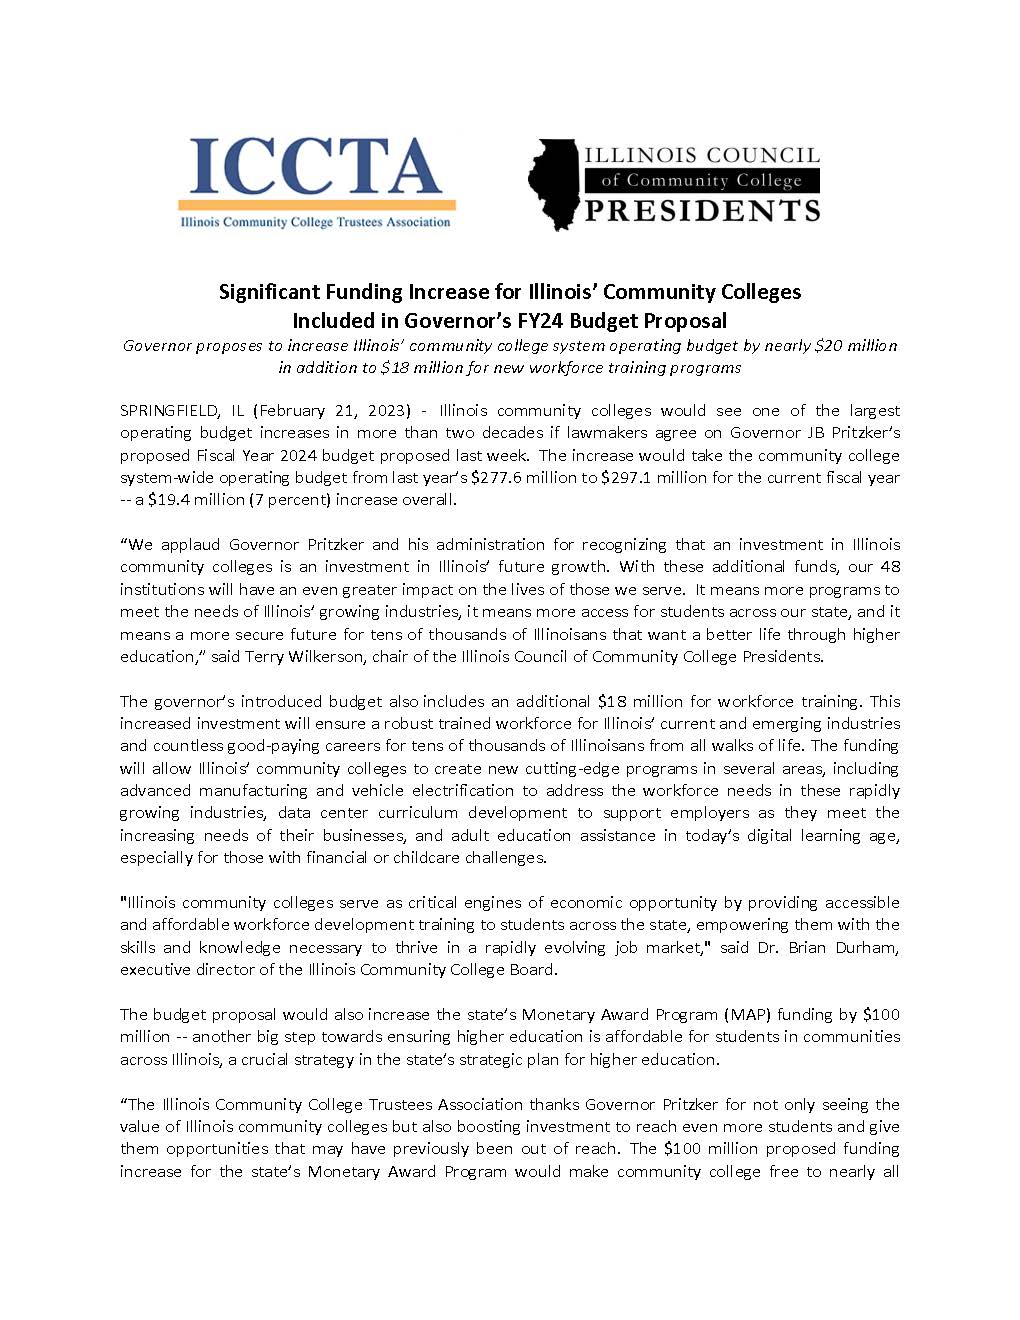 ICCTA/PC joint statement on FY24 budget